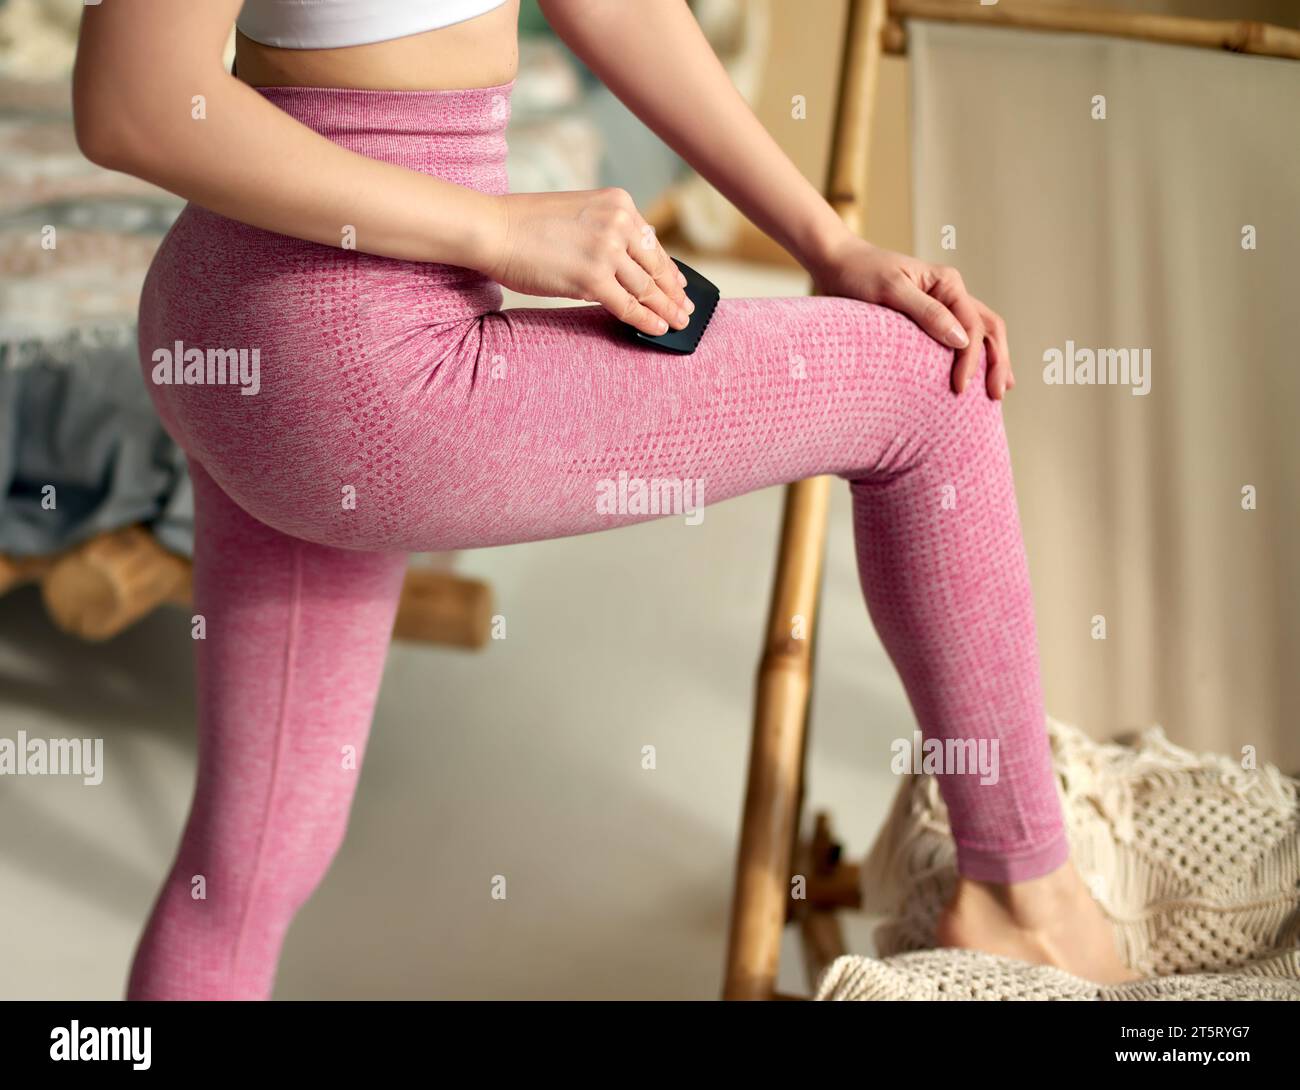 A lady dressed in pink leggings is using a black-edged Gua Sha comb on her leg to relieve muscle tension. Rehabilitation and wellness concept,   pract Stock Photo